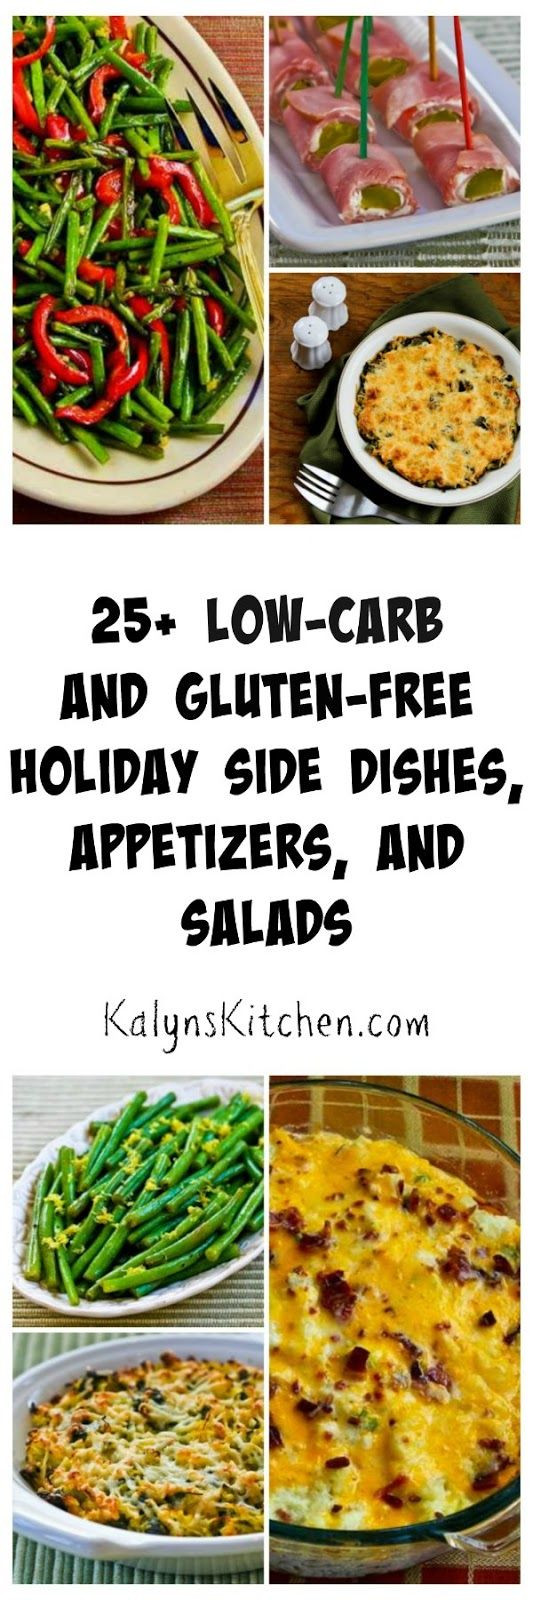 Healthy Low Carb Side Dishes
 25 Deliciously Healthy Low Carb and Gluten Free Holiday